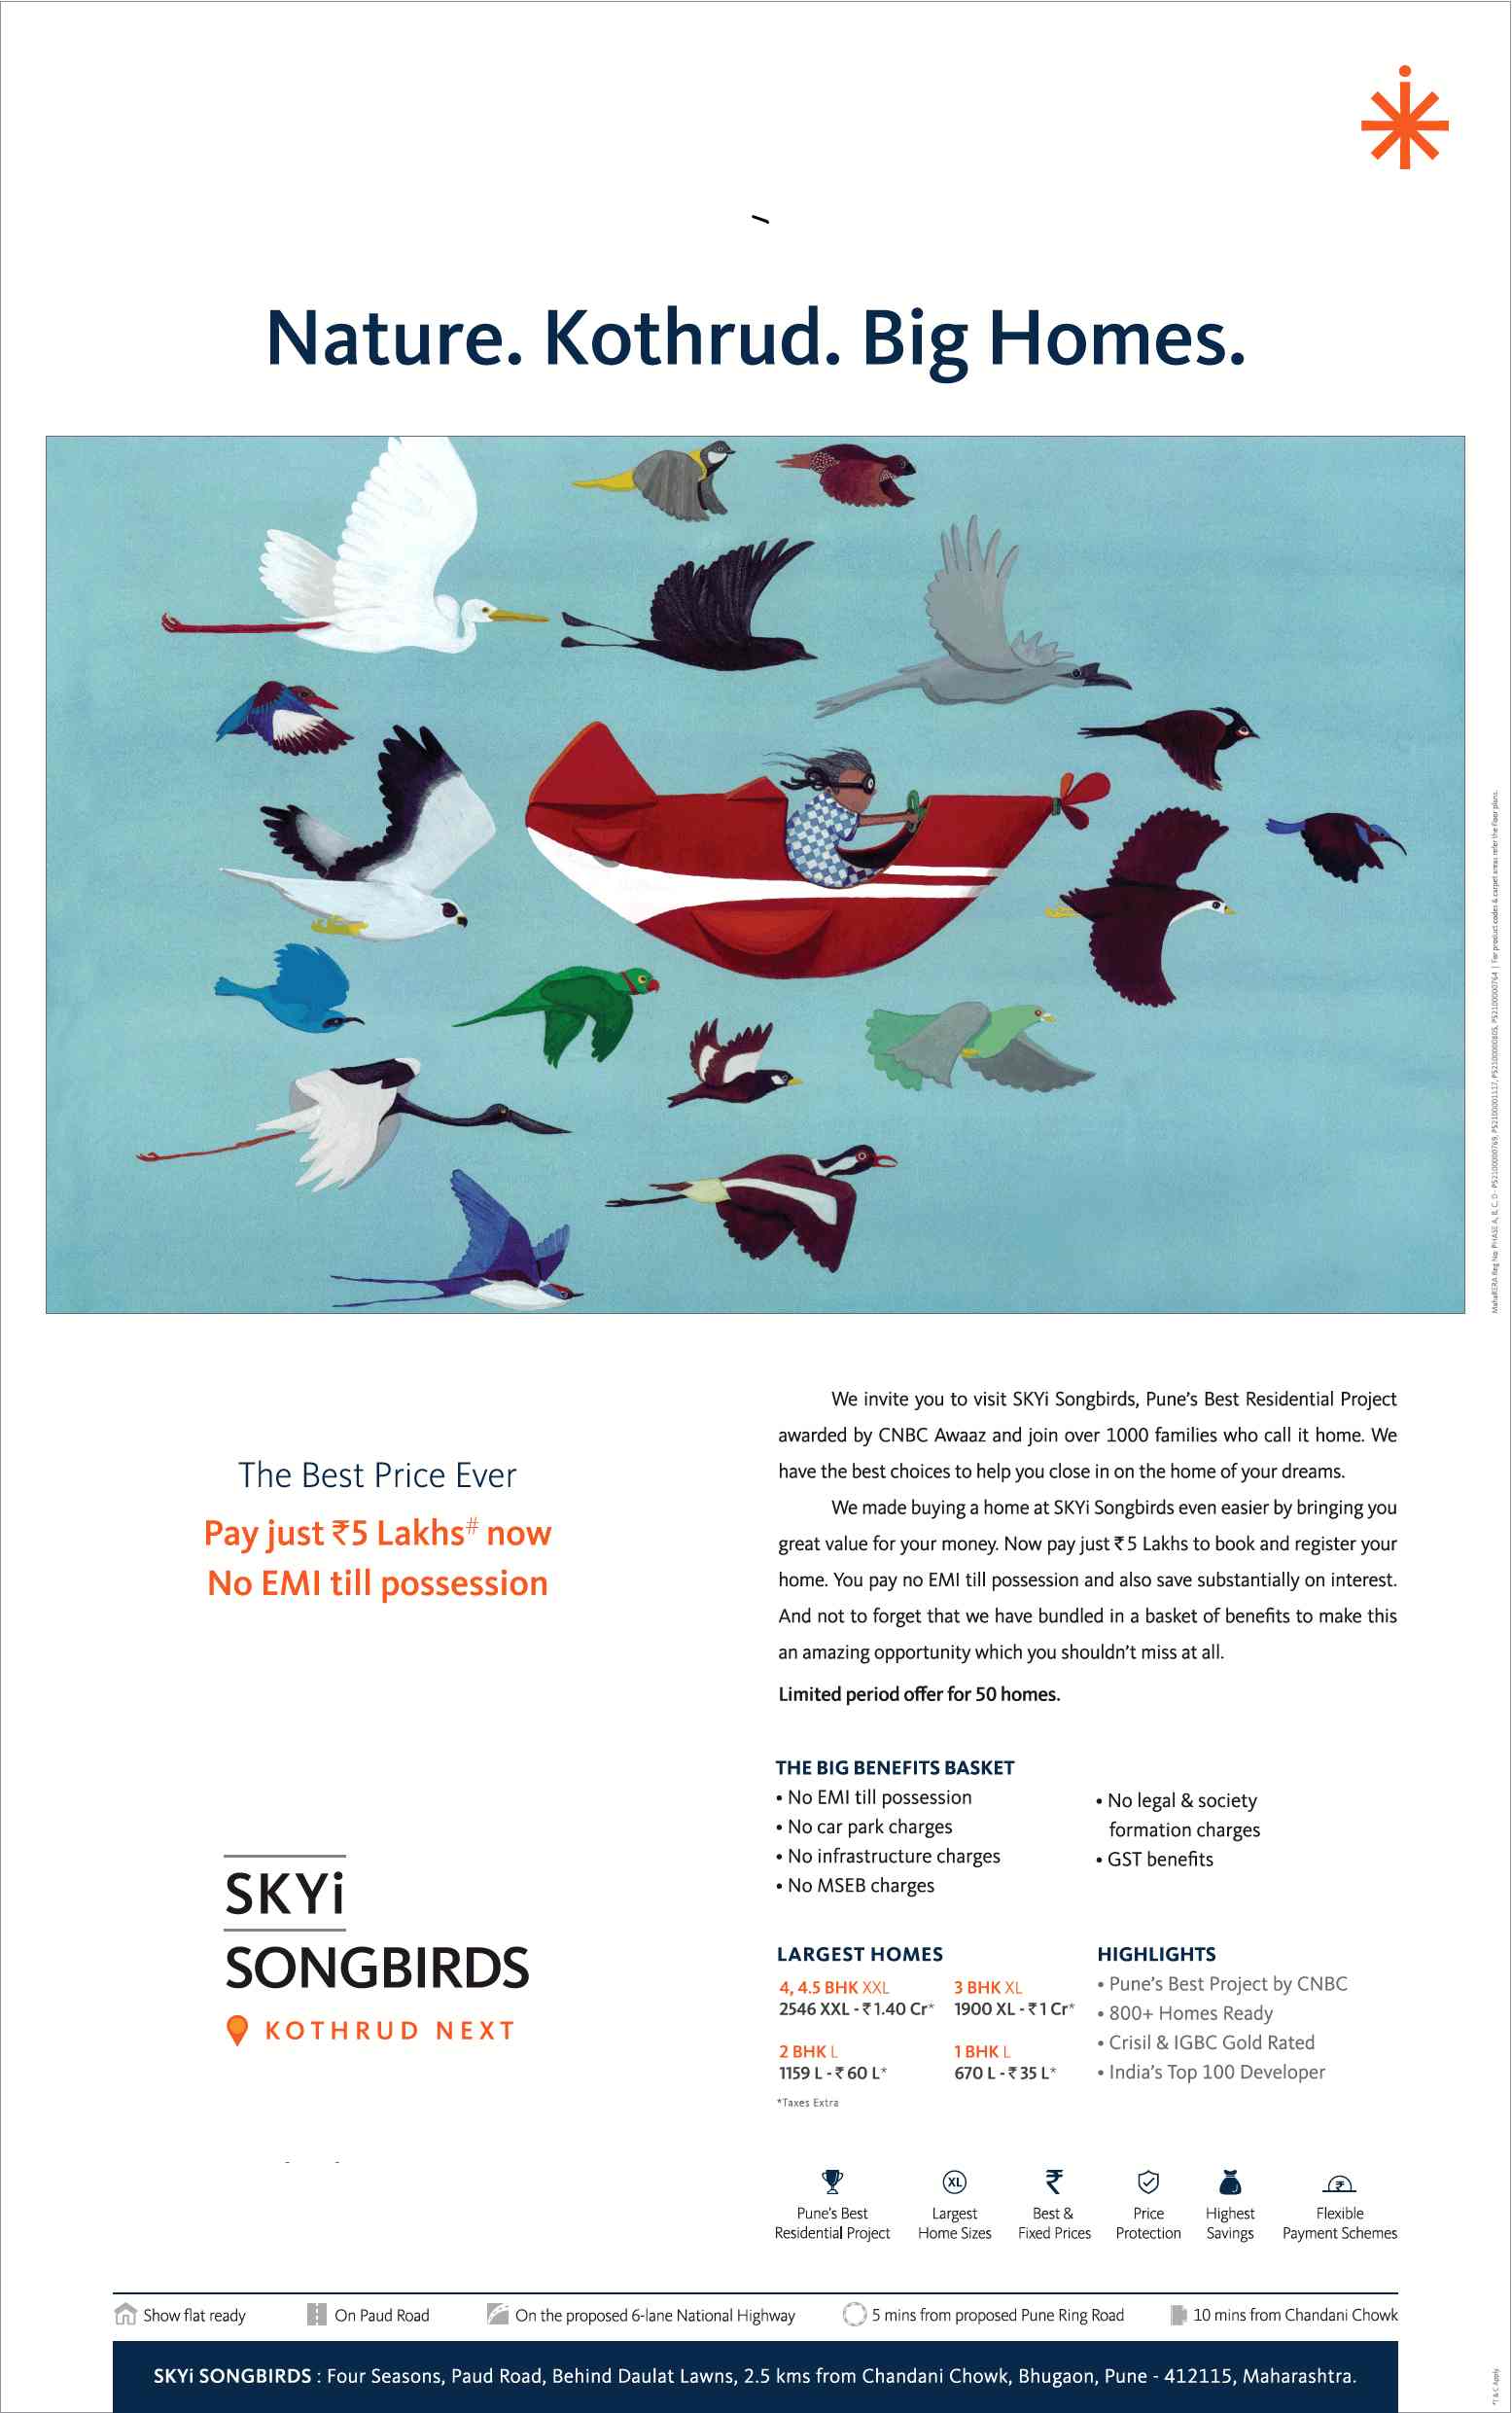 The best price ever - Pay just Rs. 5 lacs now & no EMI till possession at Skyi Songbirds in Pune